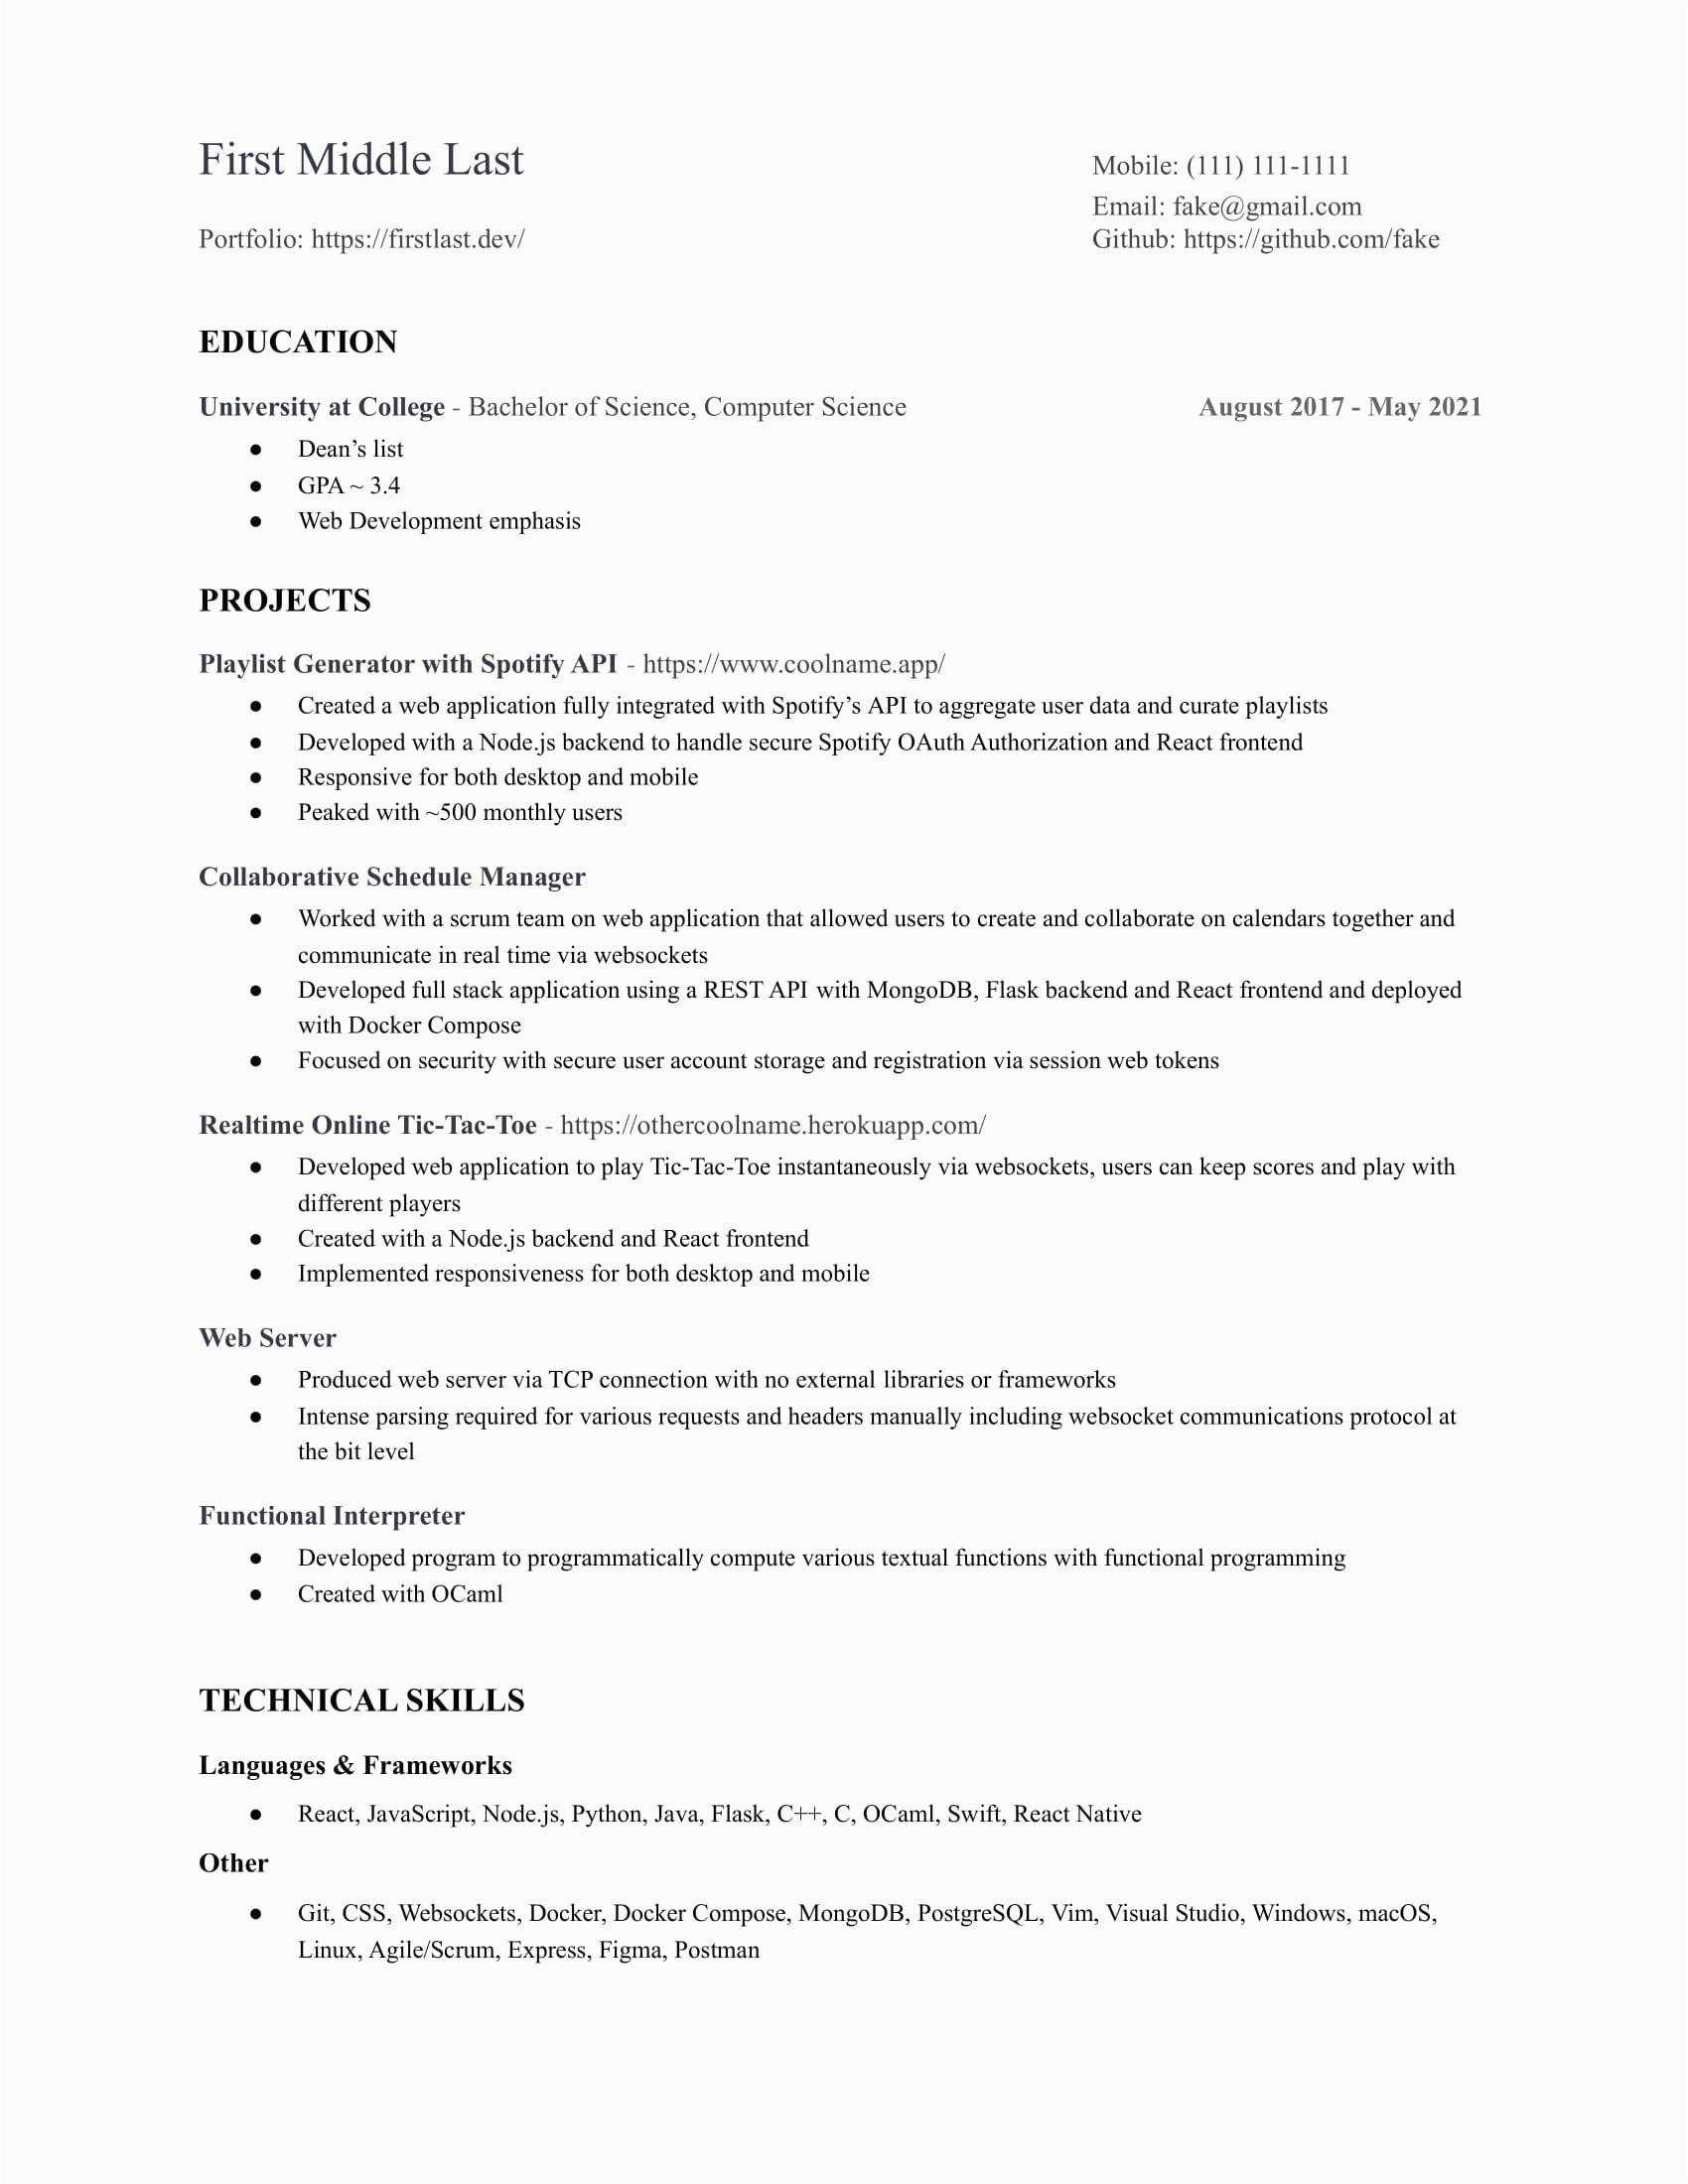 Sample Resume for Computer Science Fresh Graduate Reddit Puter Science Graduate with No Internships Feedback Needed